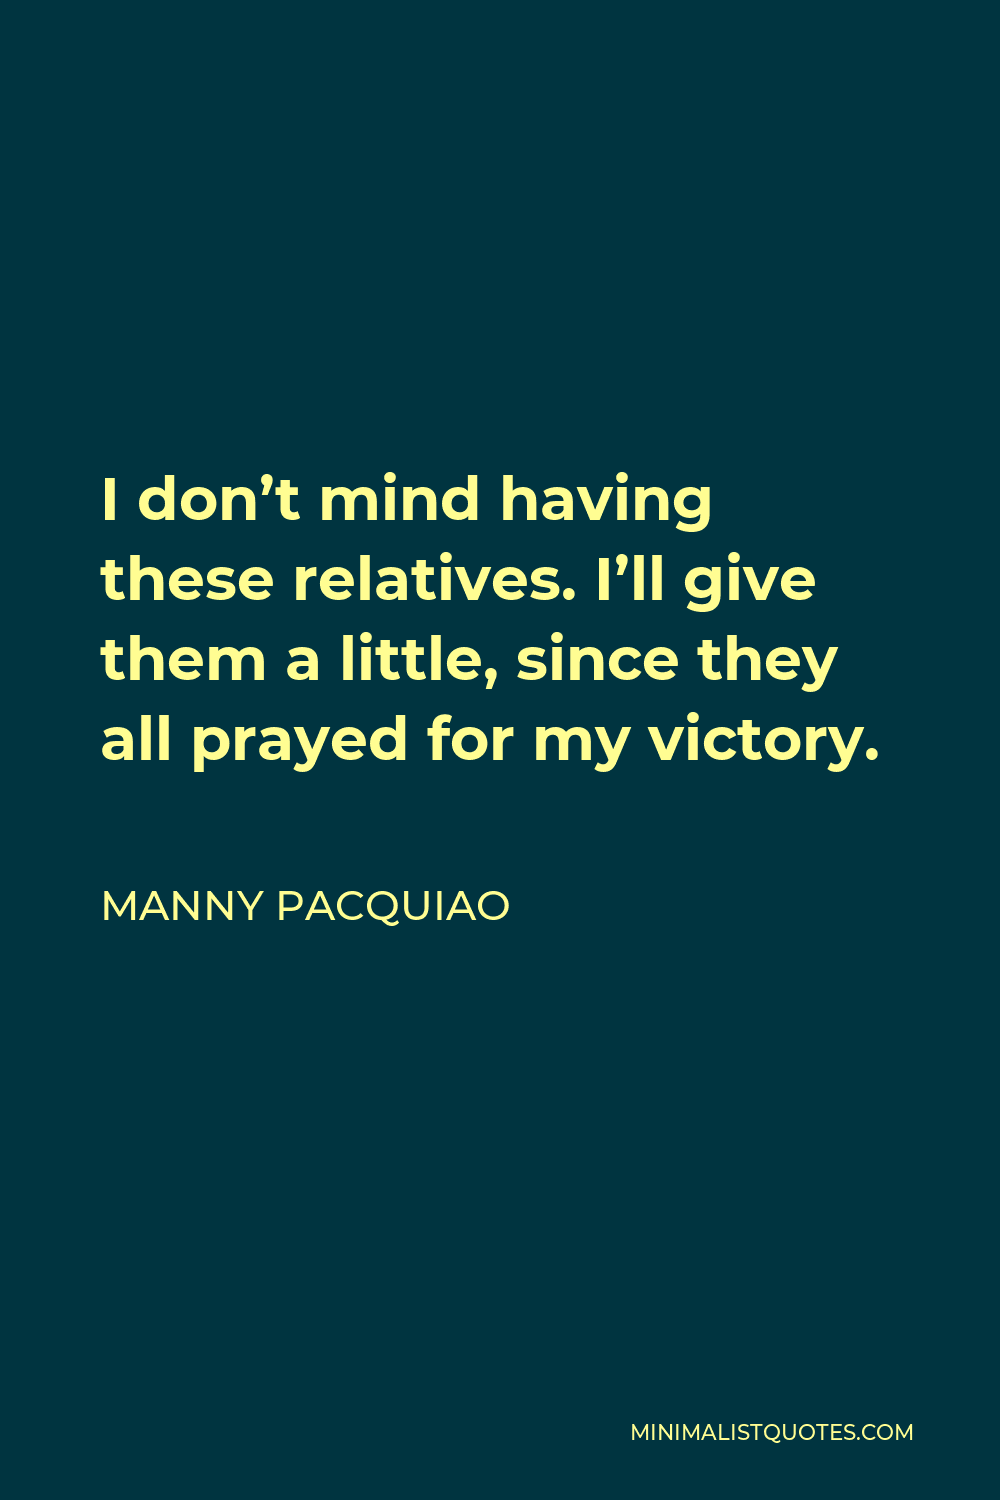 Manny Pacquiao Quote - I don’t mind having these relatives. I’ll give them a little, since they all prayed for my victory.